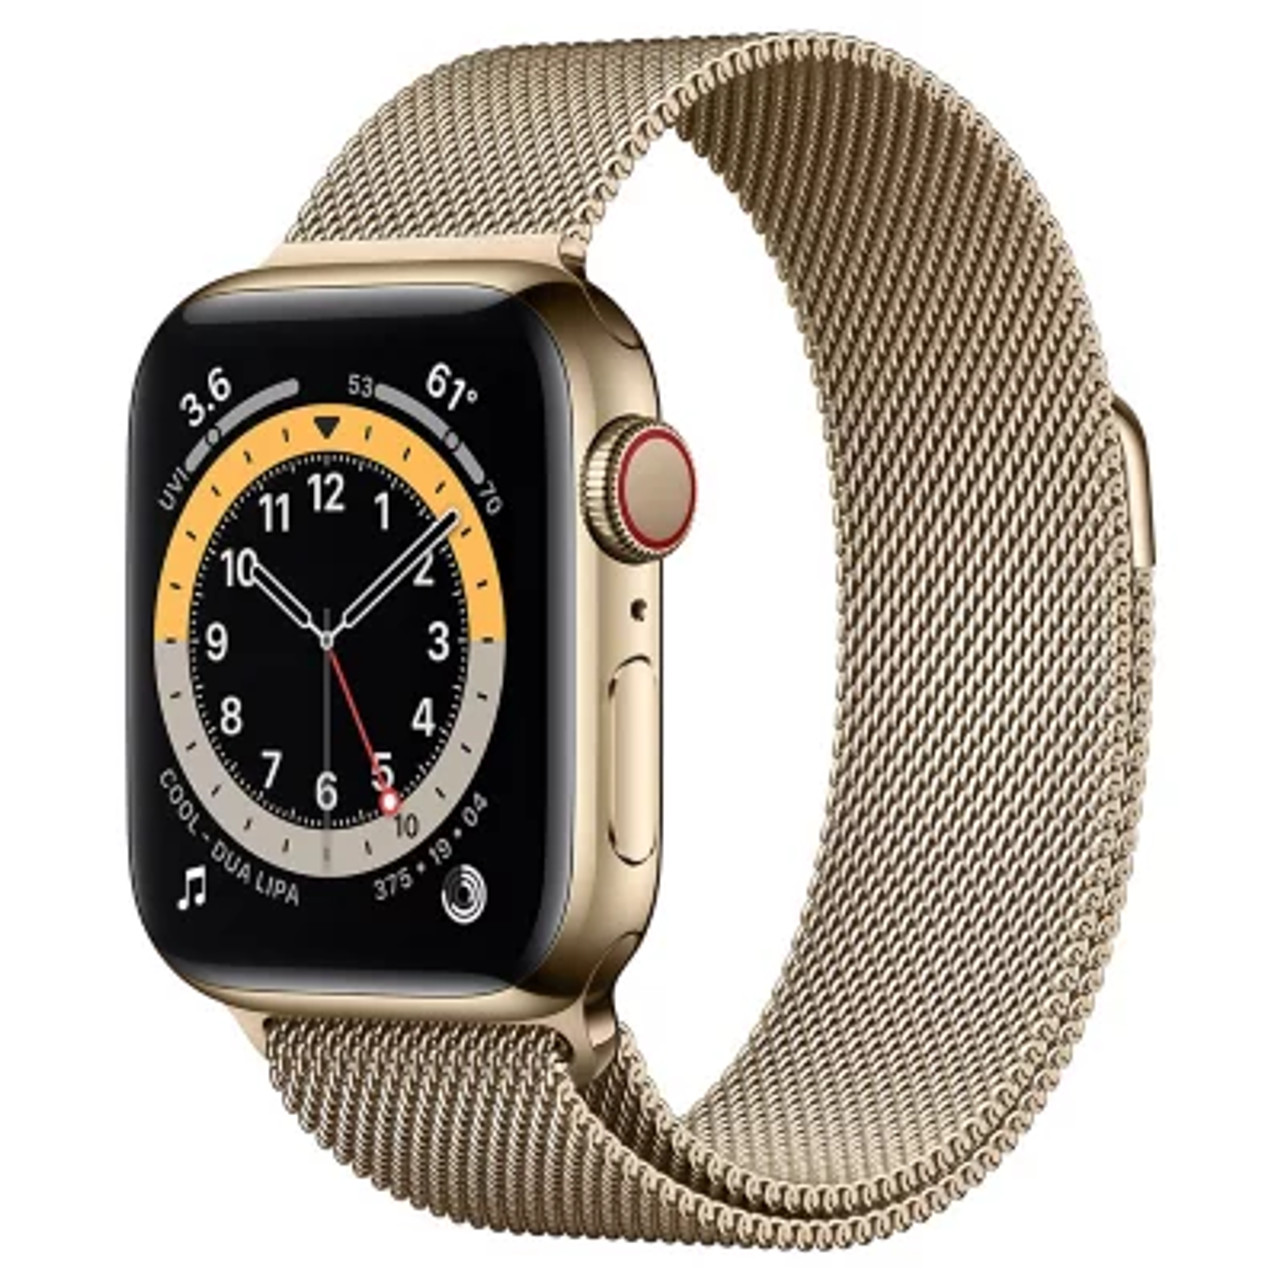 Apple Watch Series 6 (40 mm GPS + Cellular) Gold SS Body Gold Milanese Loop  New